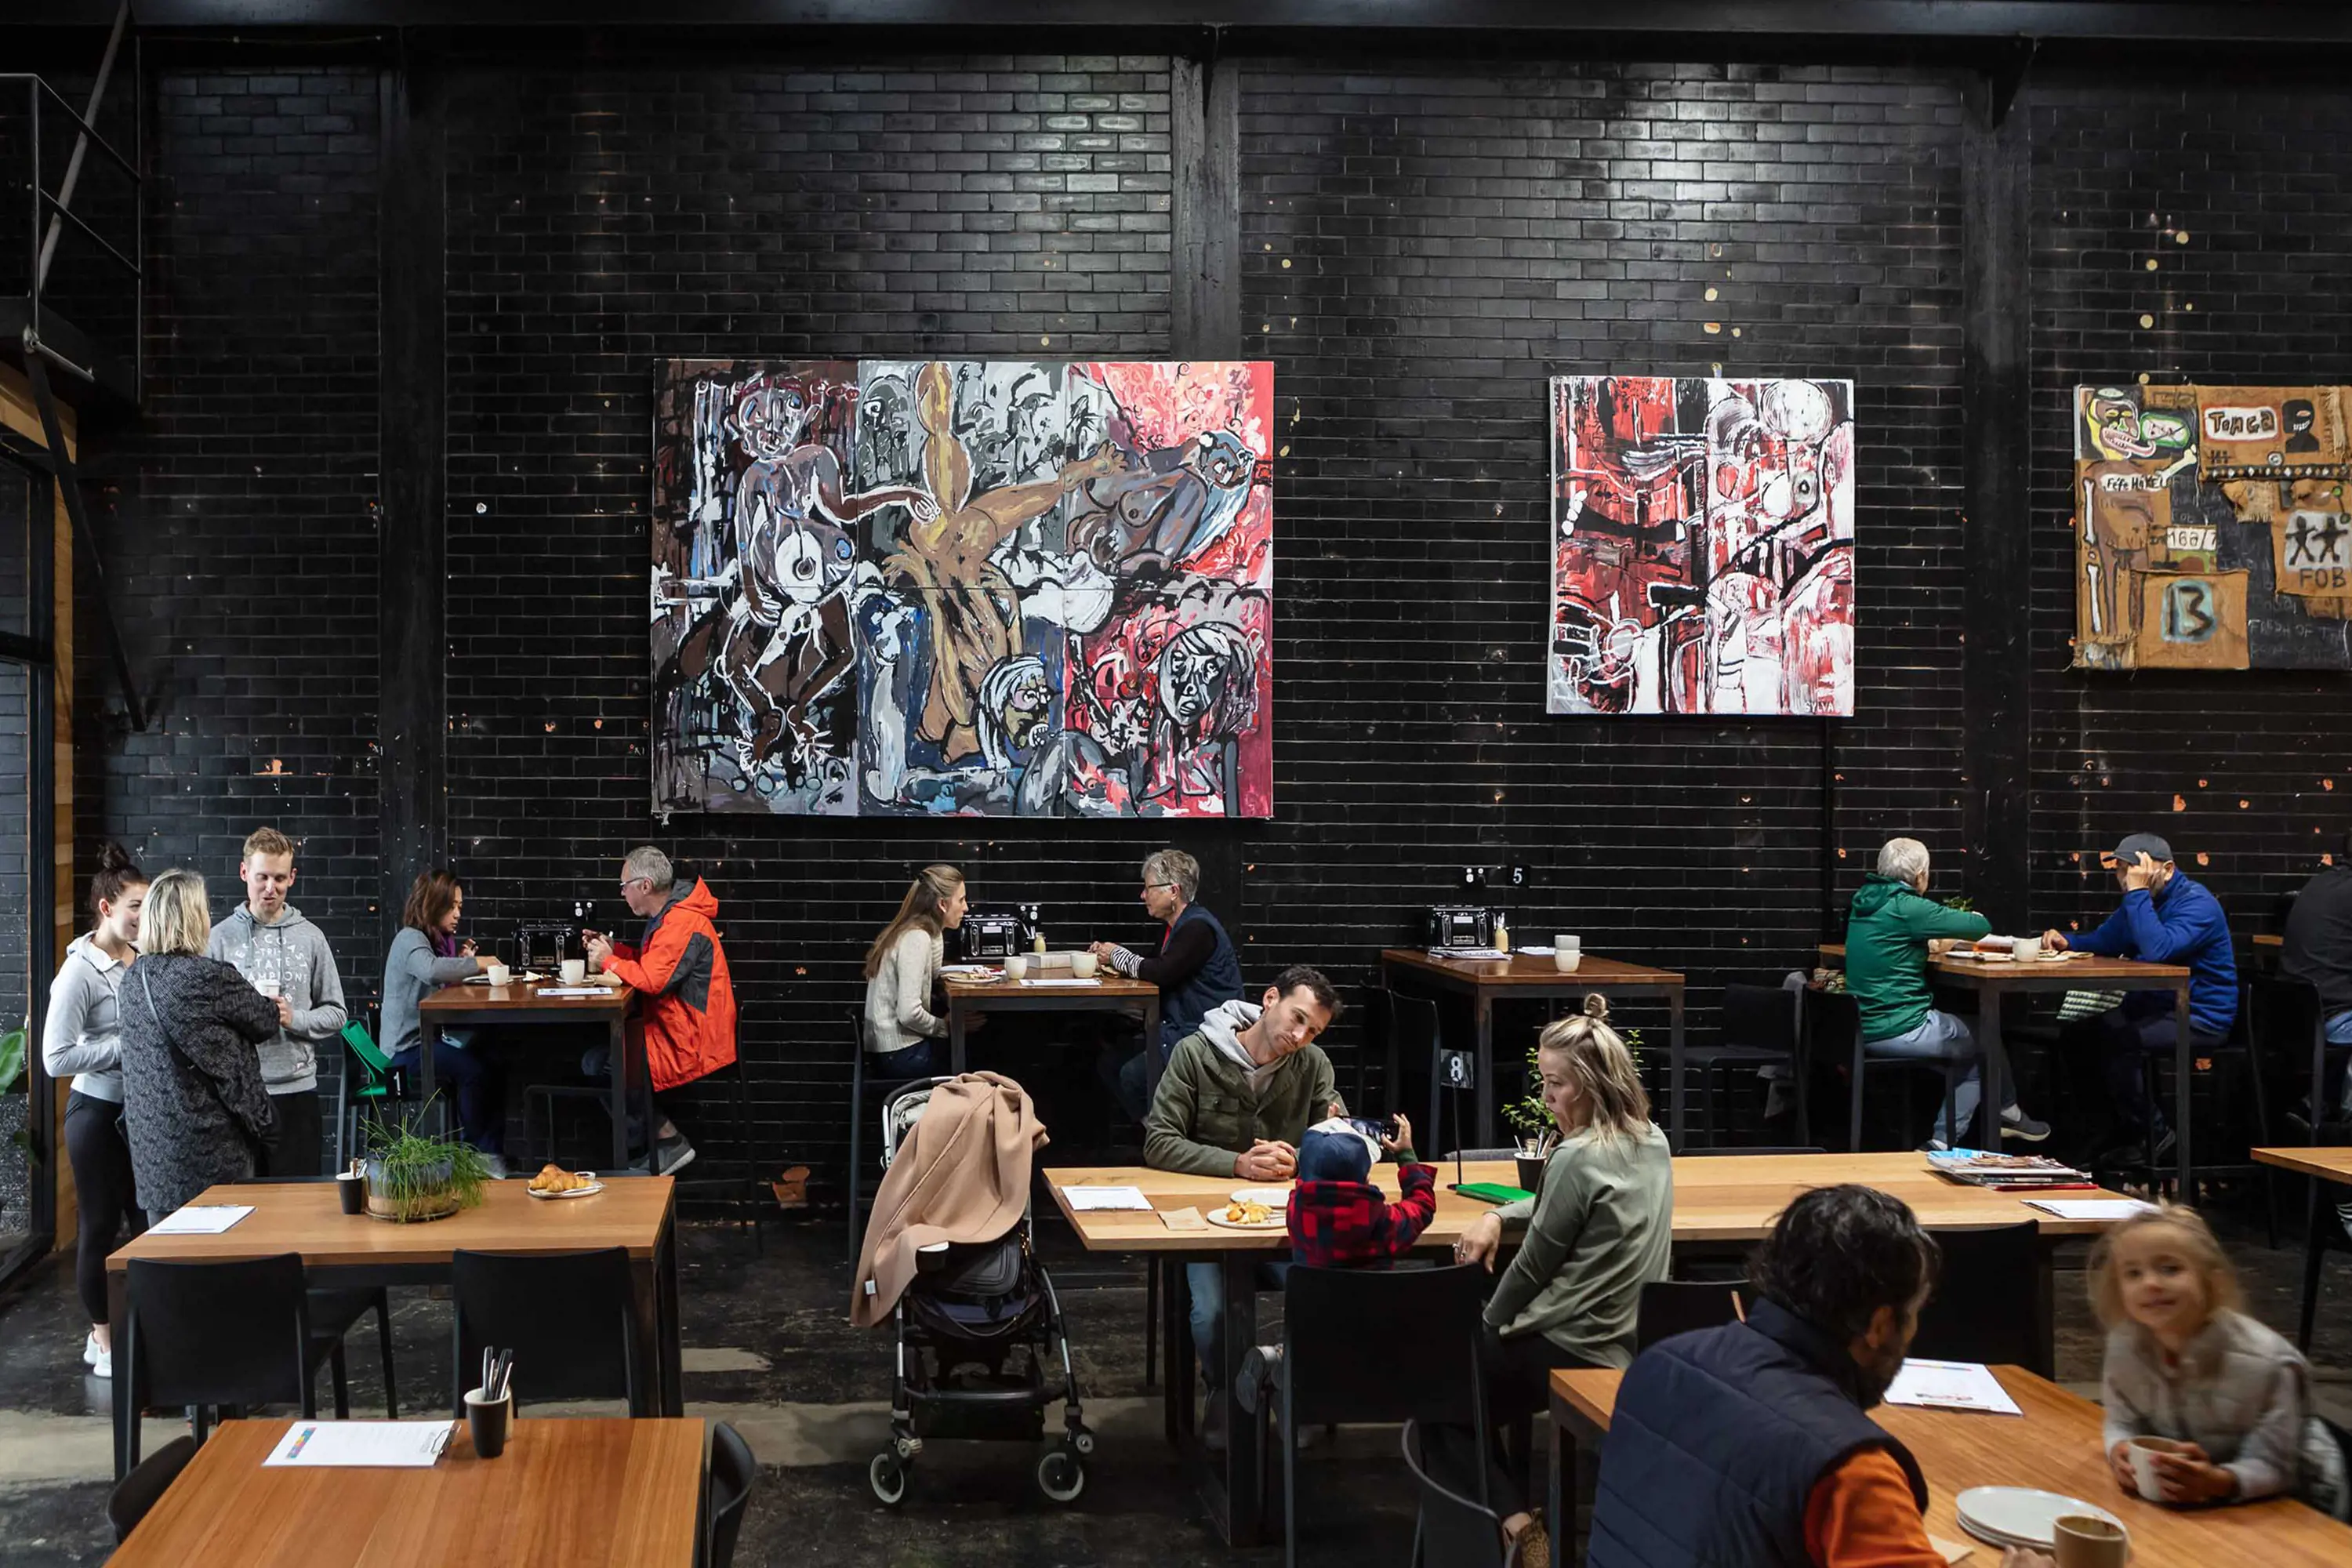 Groups of people sit at tables in a cafe within a converted factory space. Contemporary artwork is hung form the brick walls, which have been painted black.